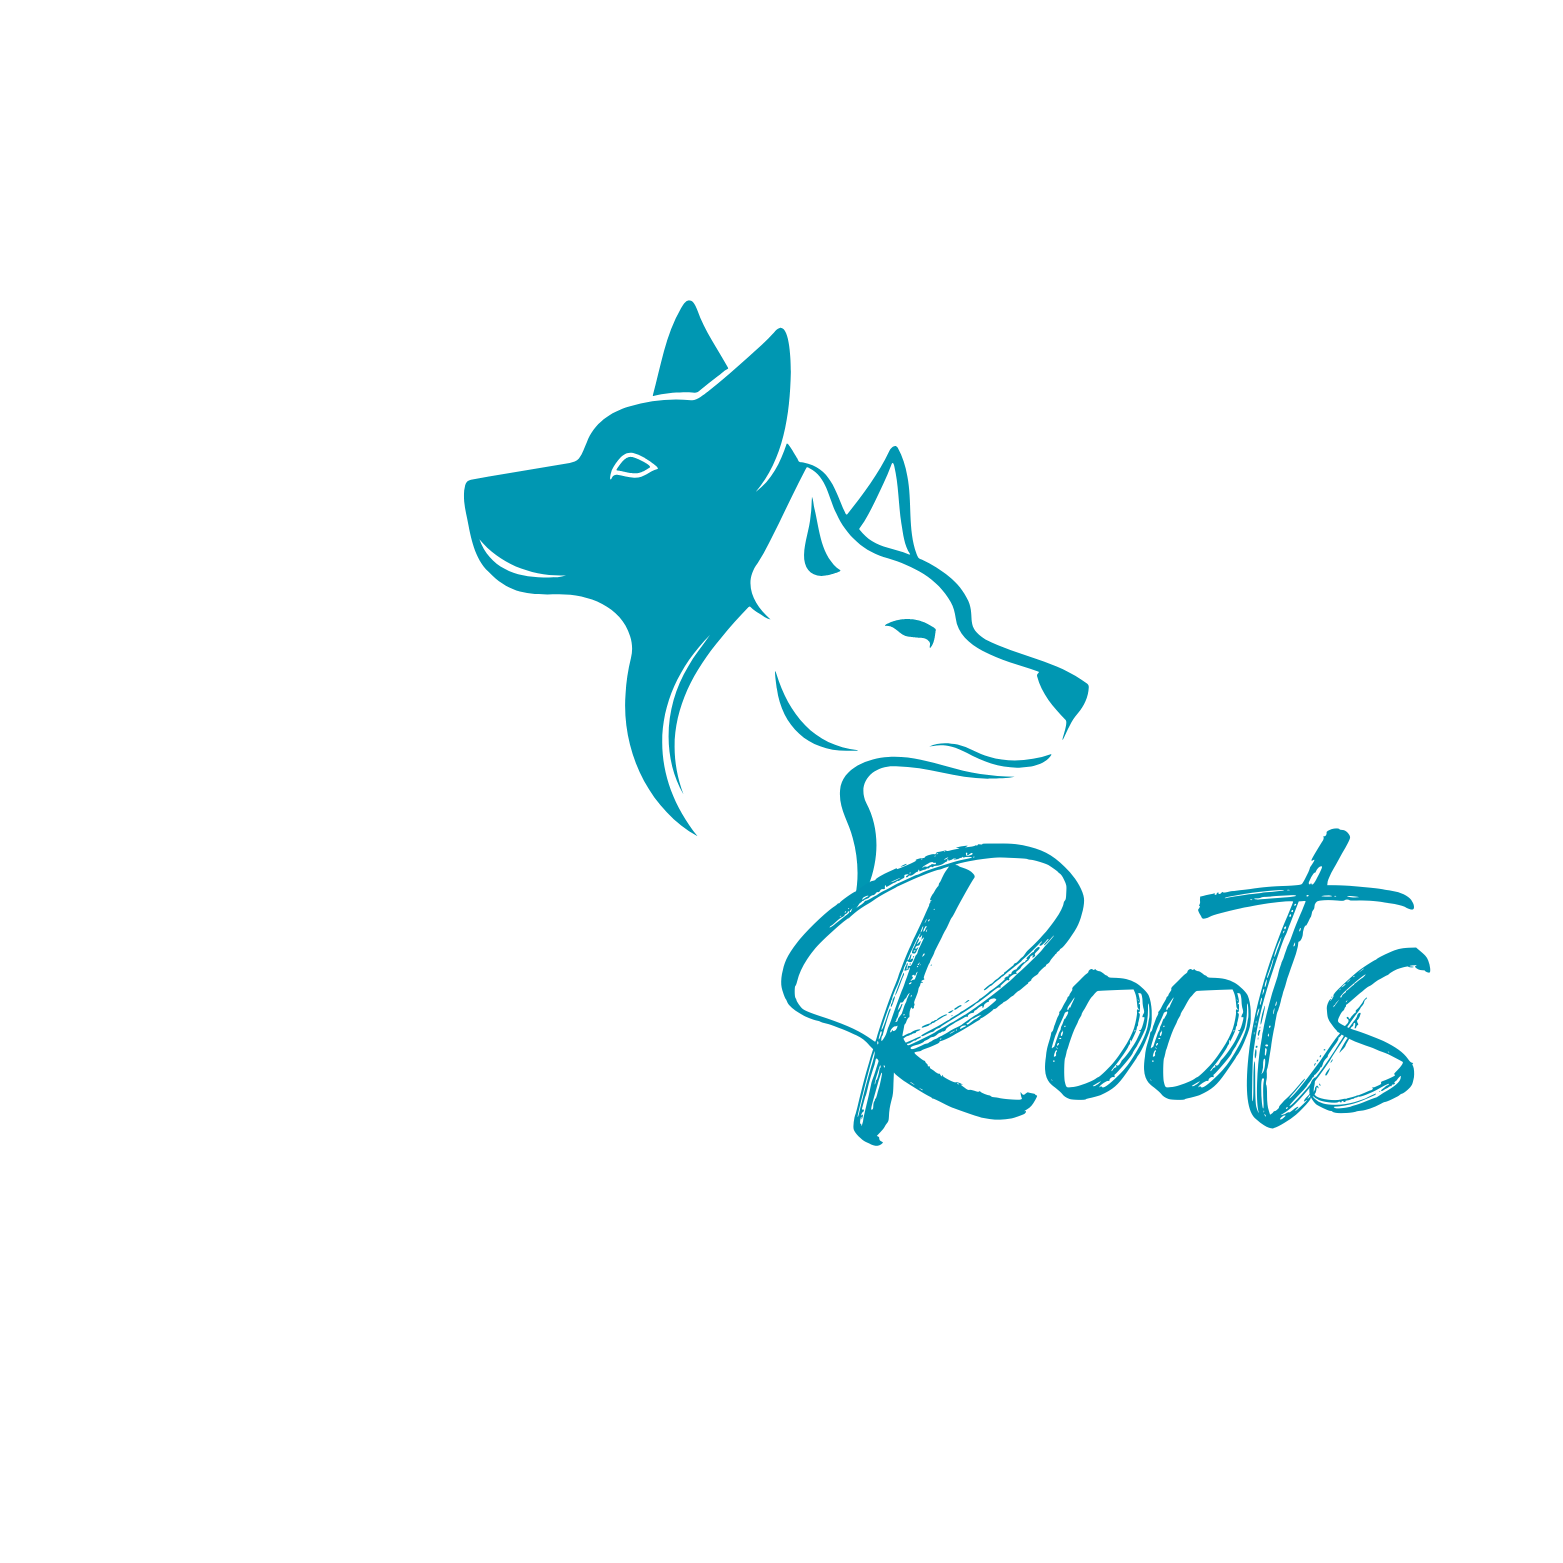 American Bullies in a logo with the words rasta roots and bully in nice colors